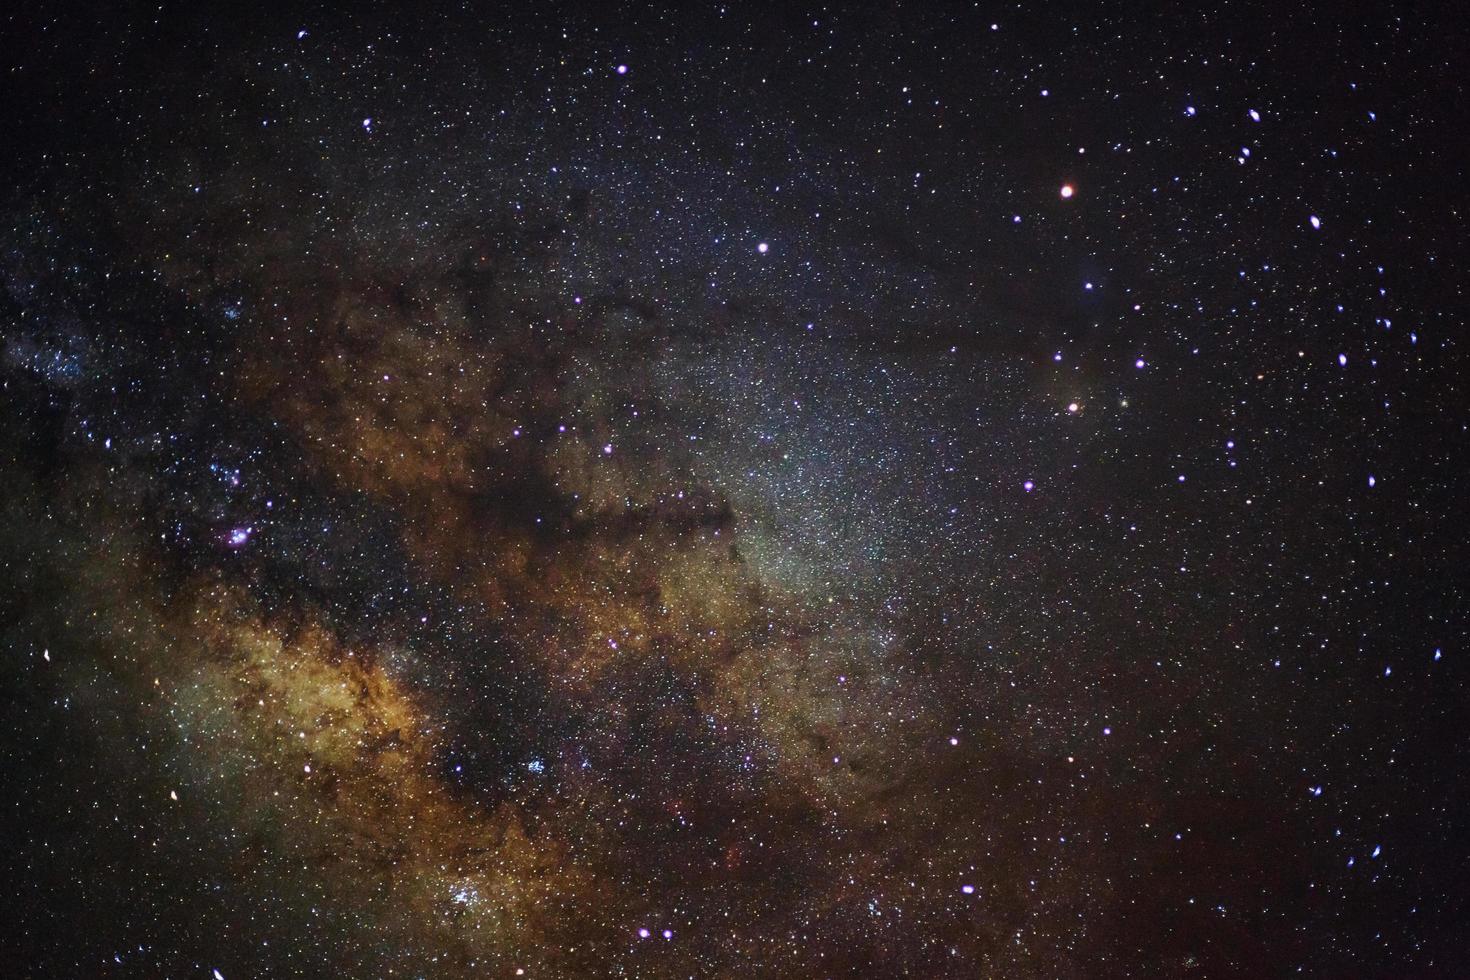 A wide angle view of the Antares Region of the Milky Way photo